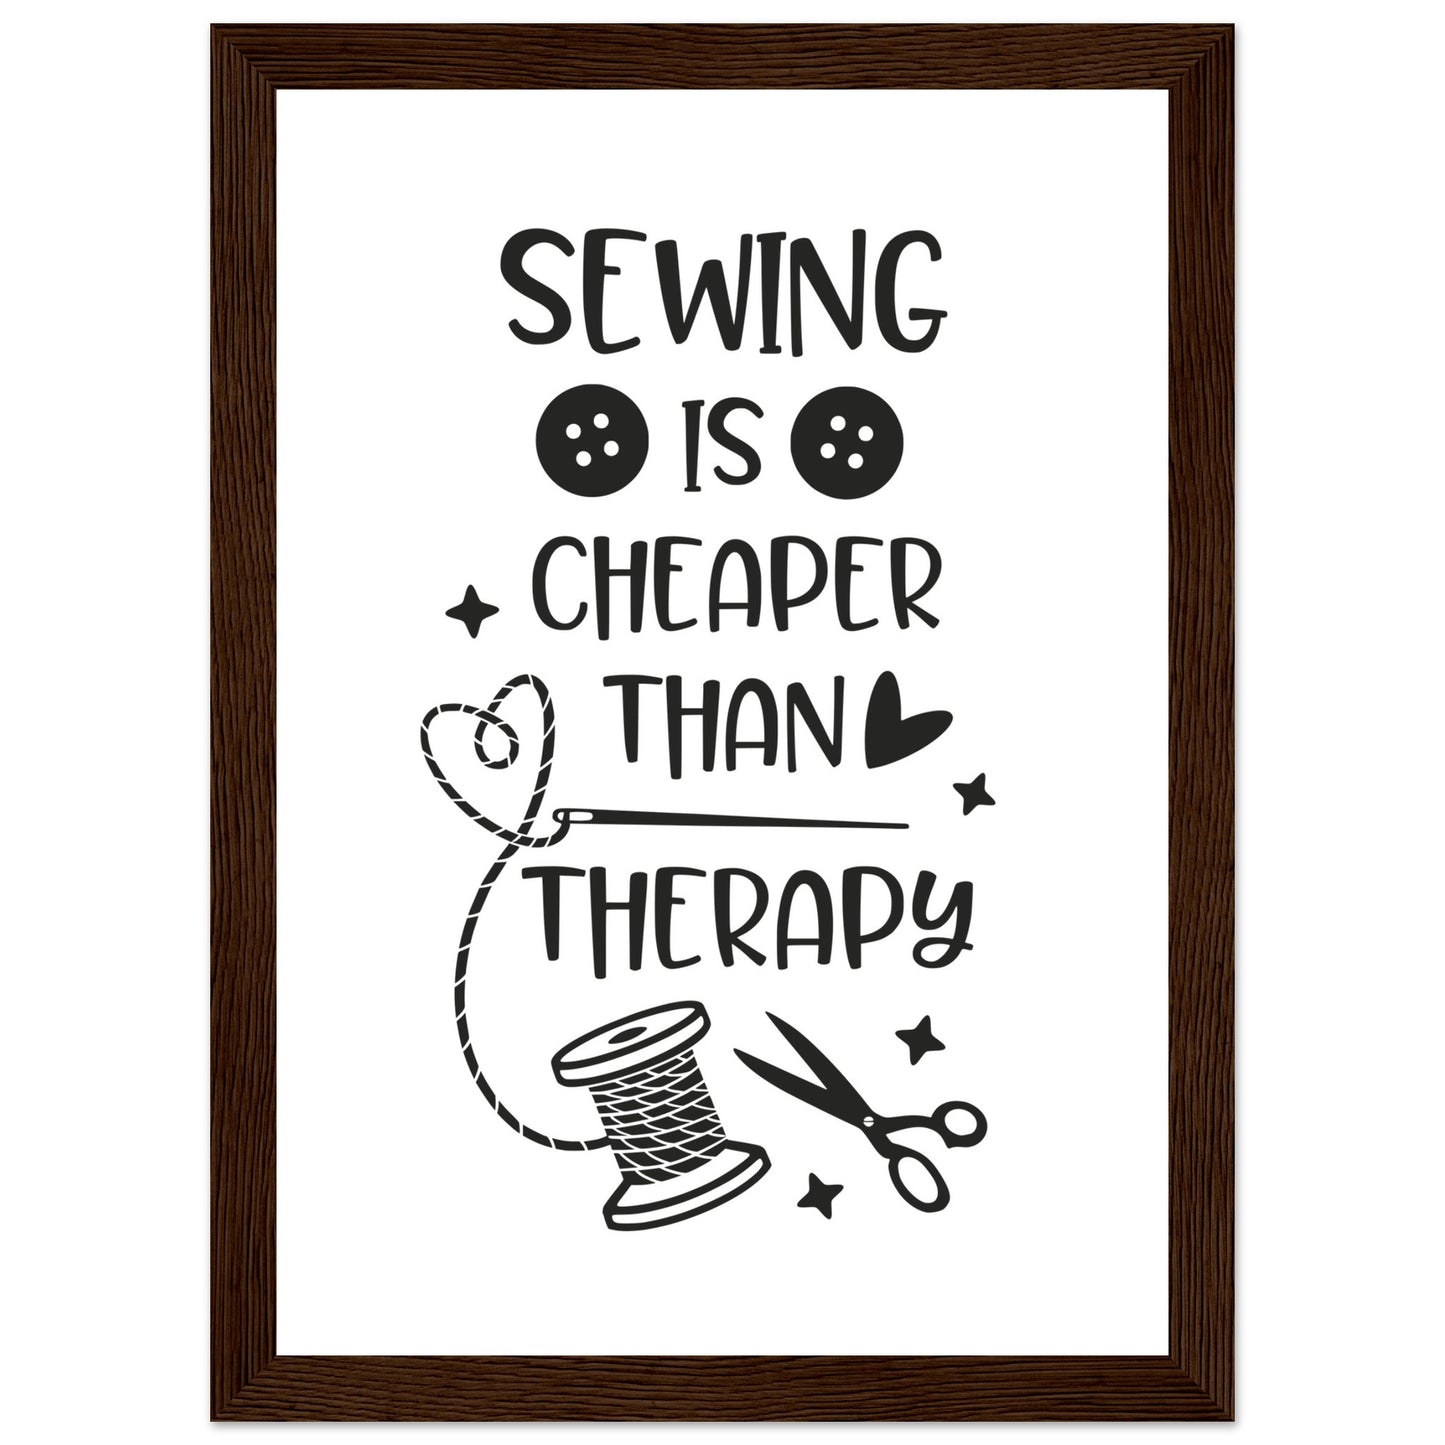 Sewing is Cheaper Than Therapy - Quilting Wall Art - Premium Matte Paper Wooden Framed Poster